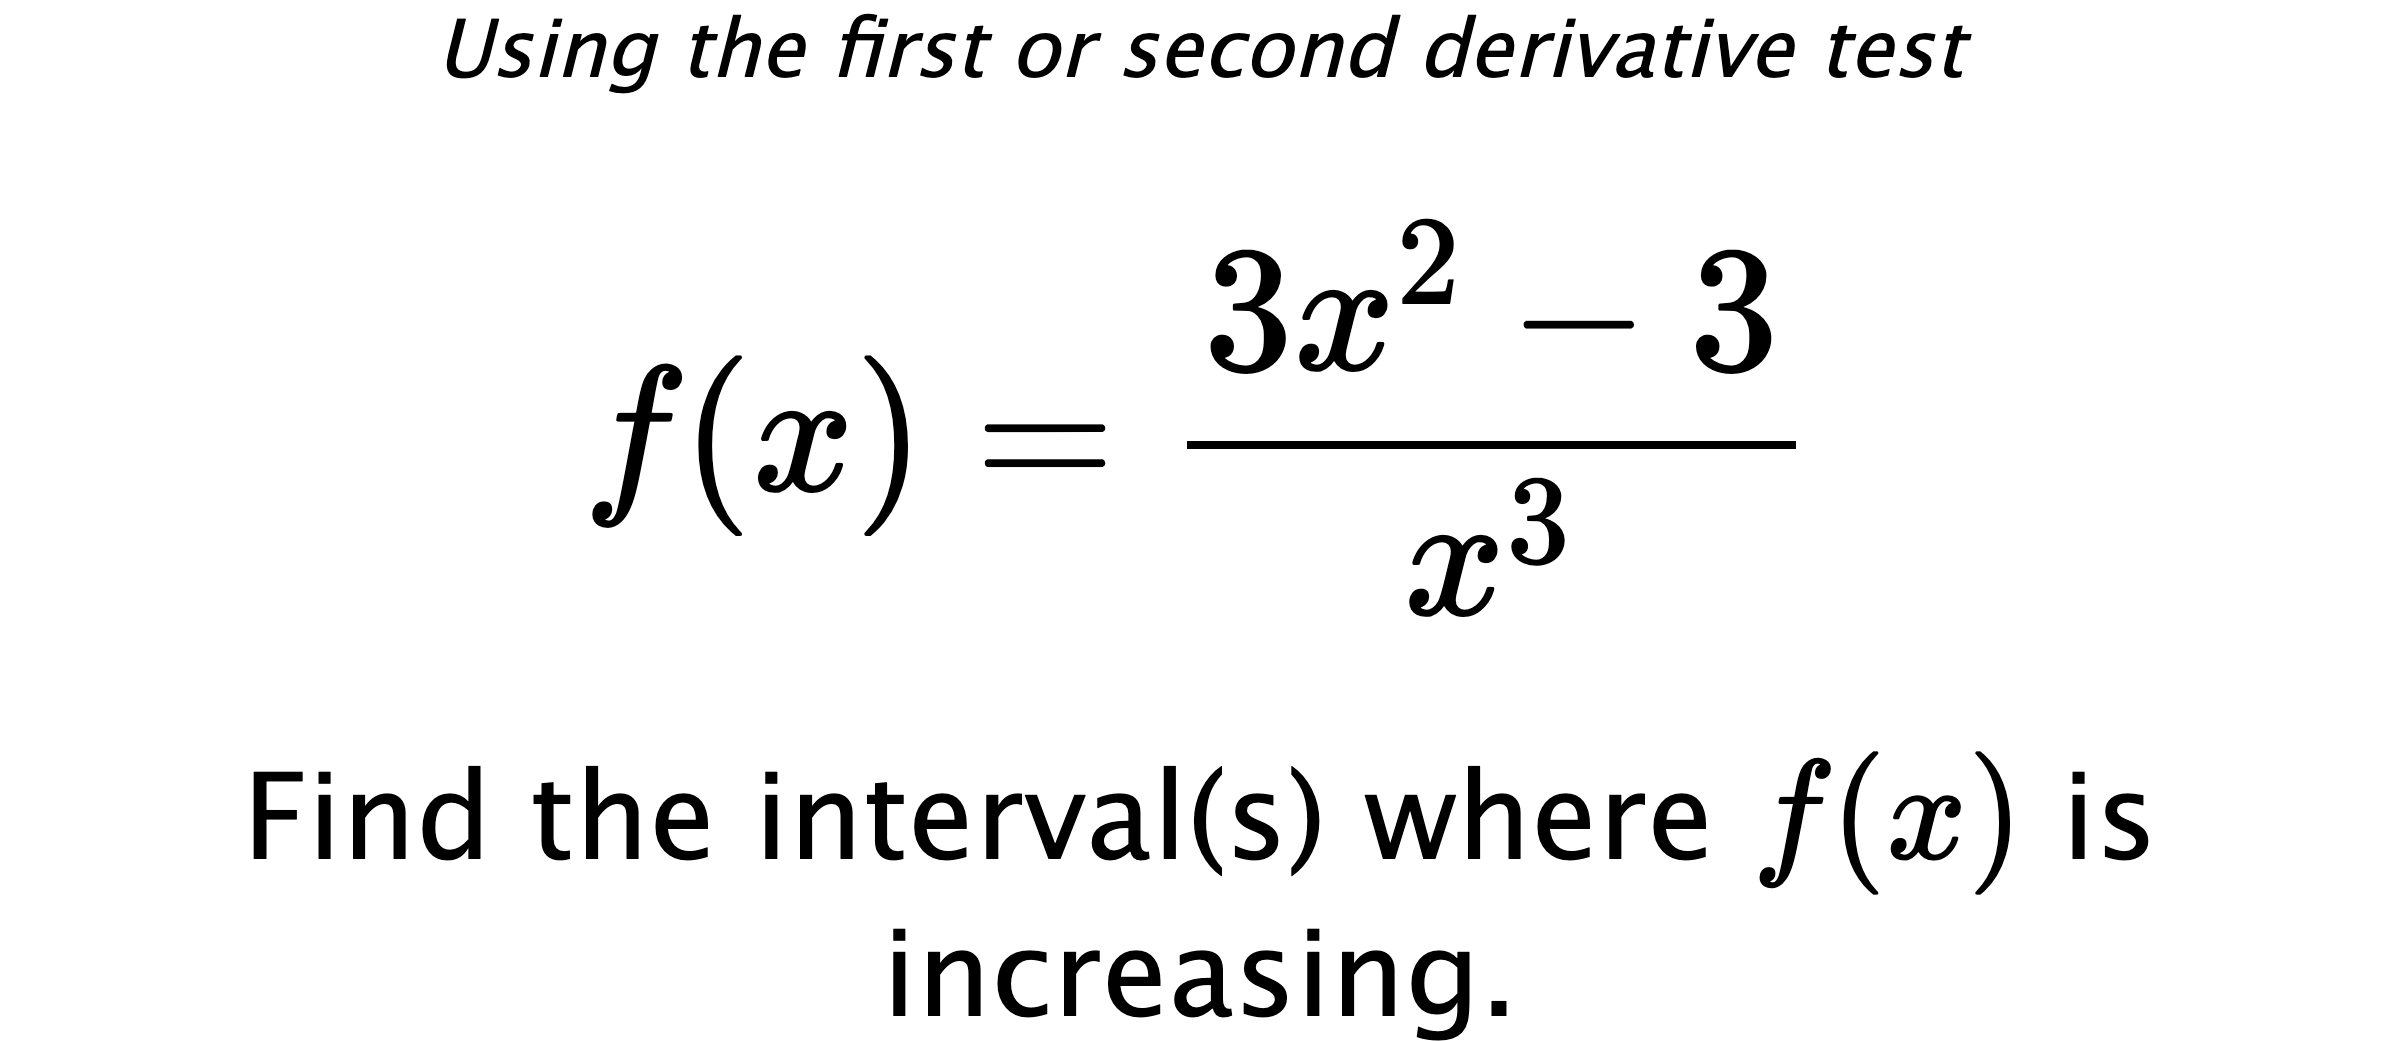 Using the first or second derivative test $$ f(x)=\frac{3x^2-3}{x^3} $$ Find the interval(s) where $ f(x) $ is increasing.